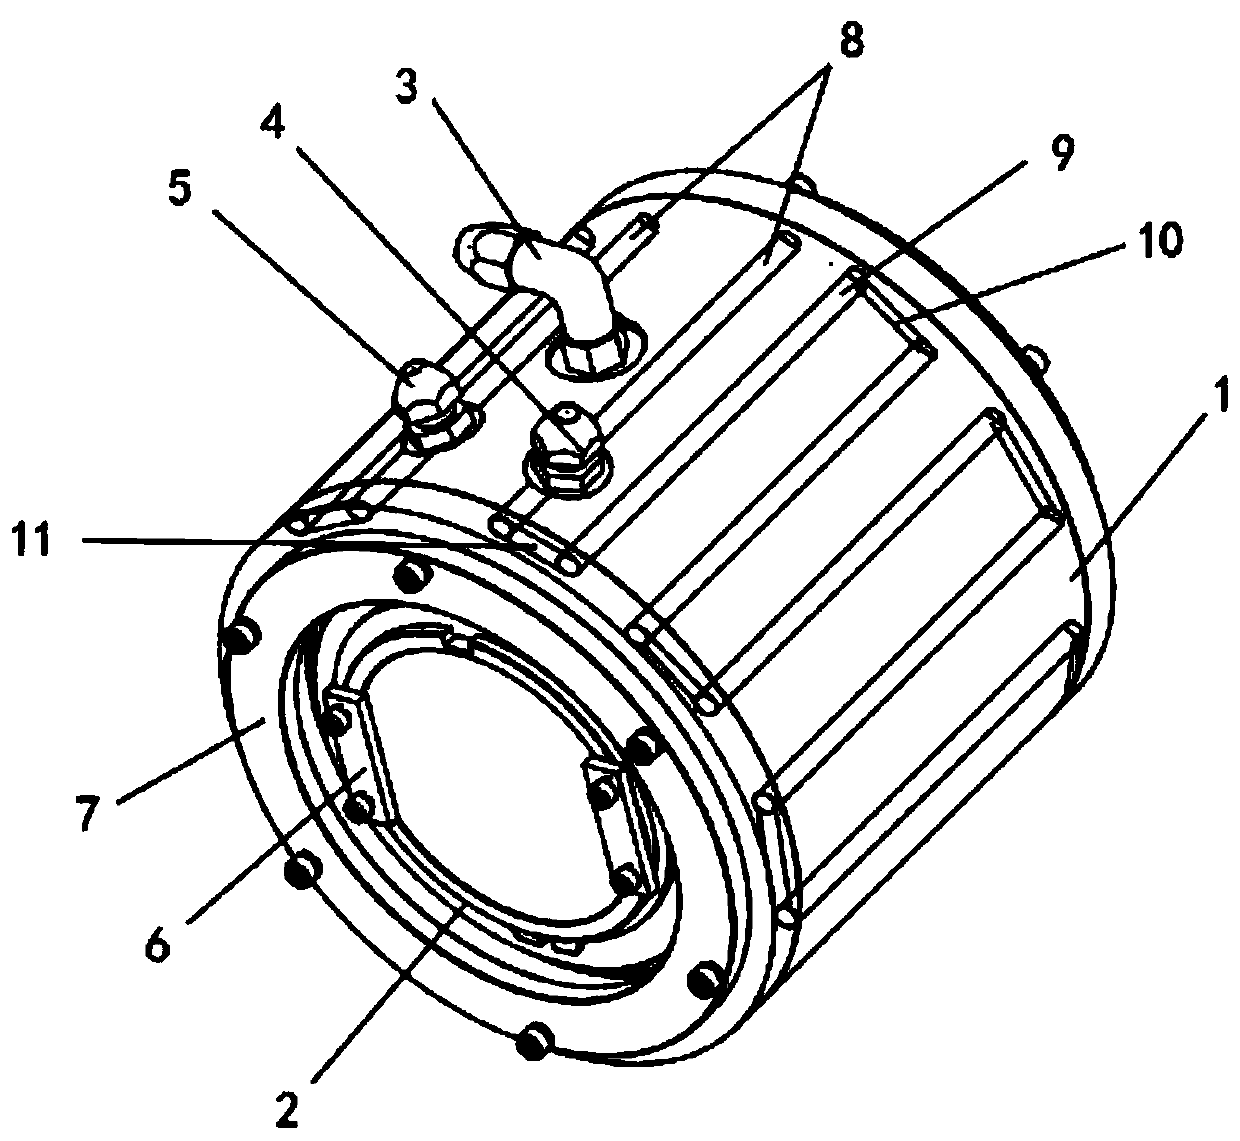 Water-cooling rotary air inlet device